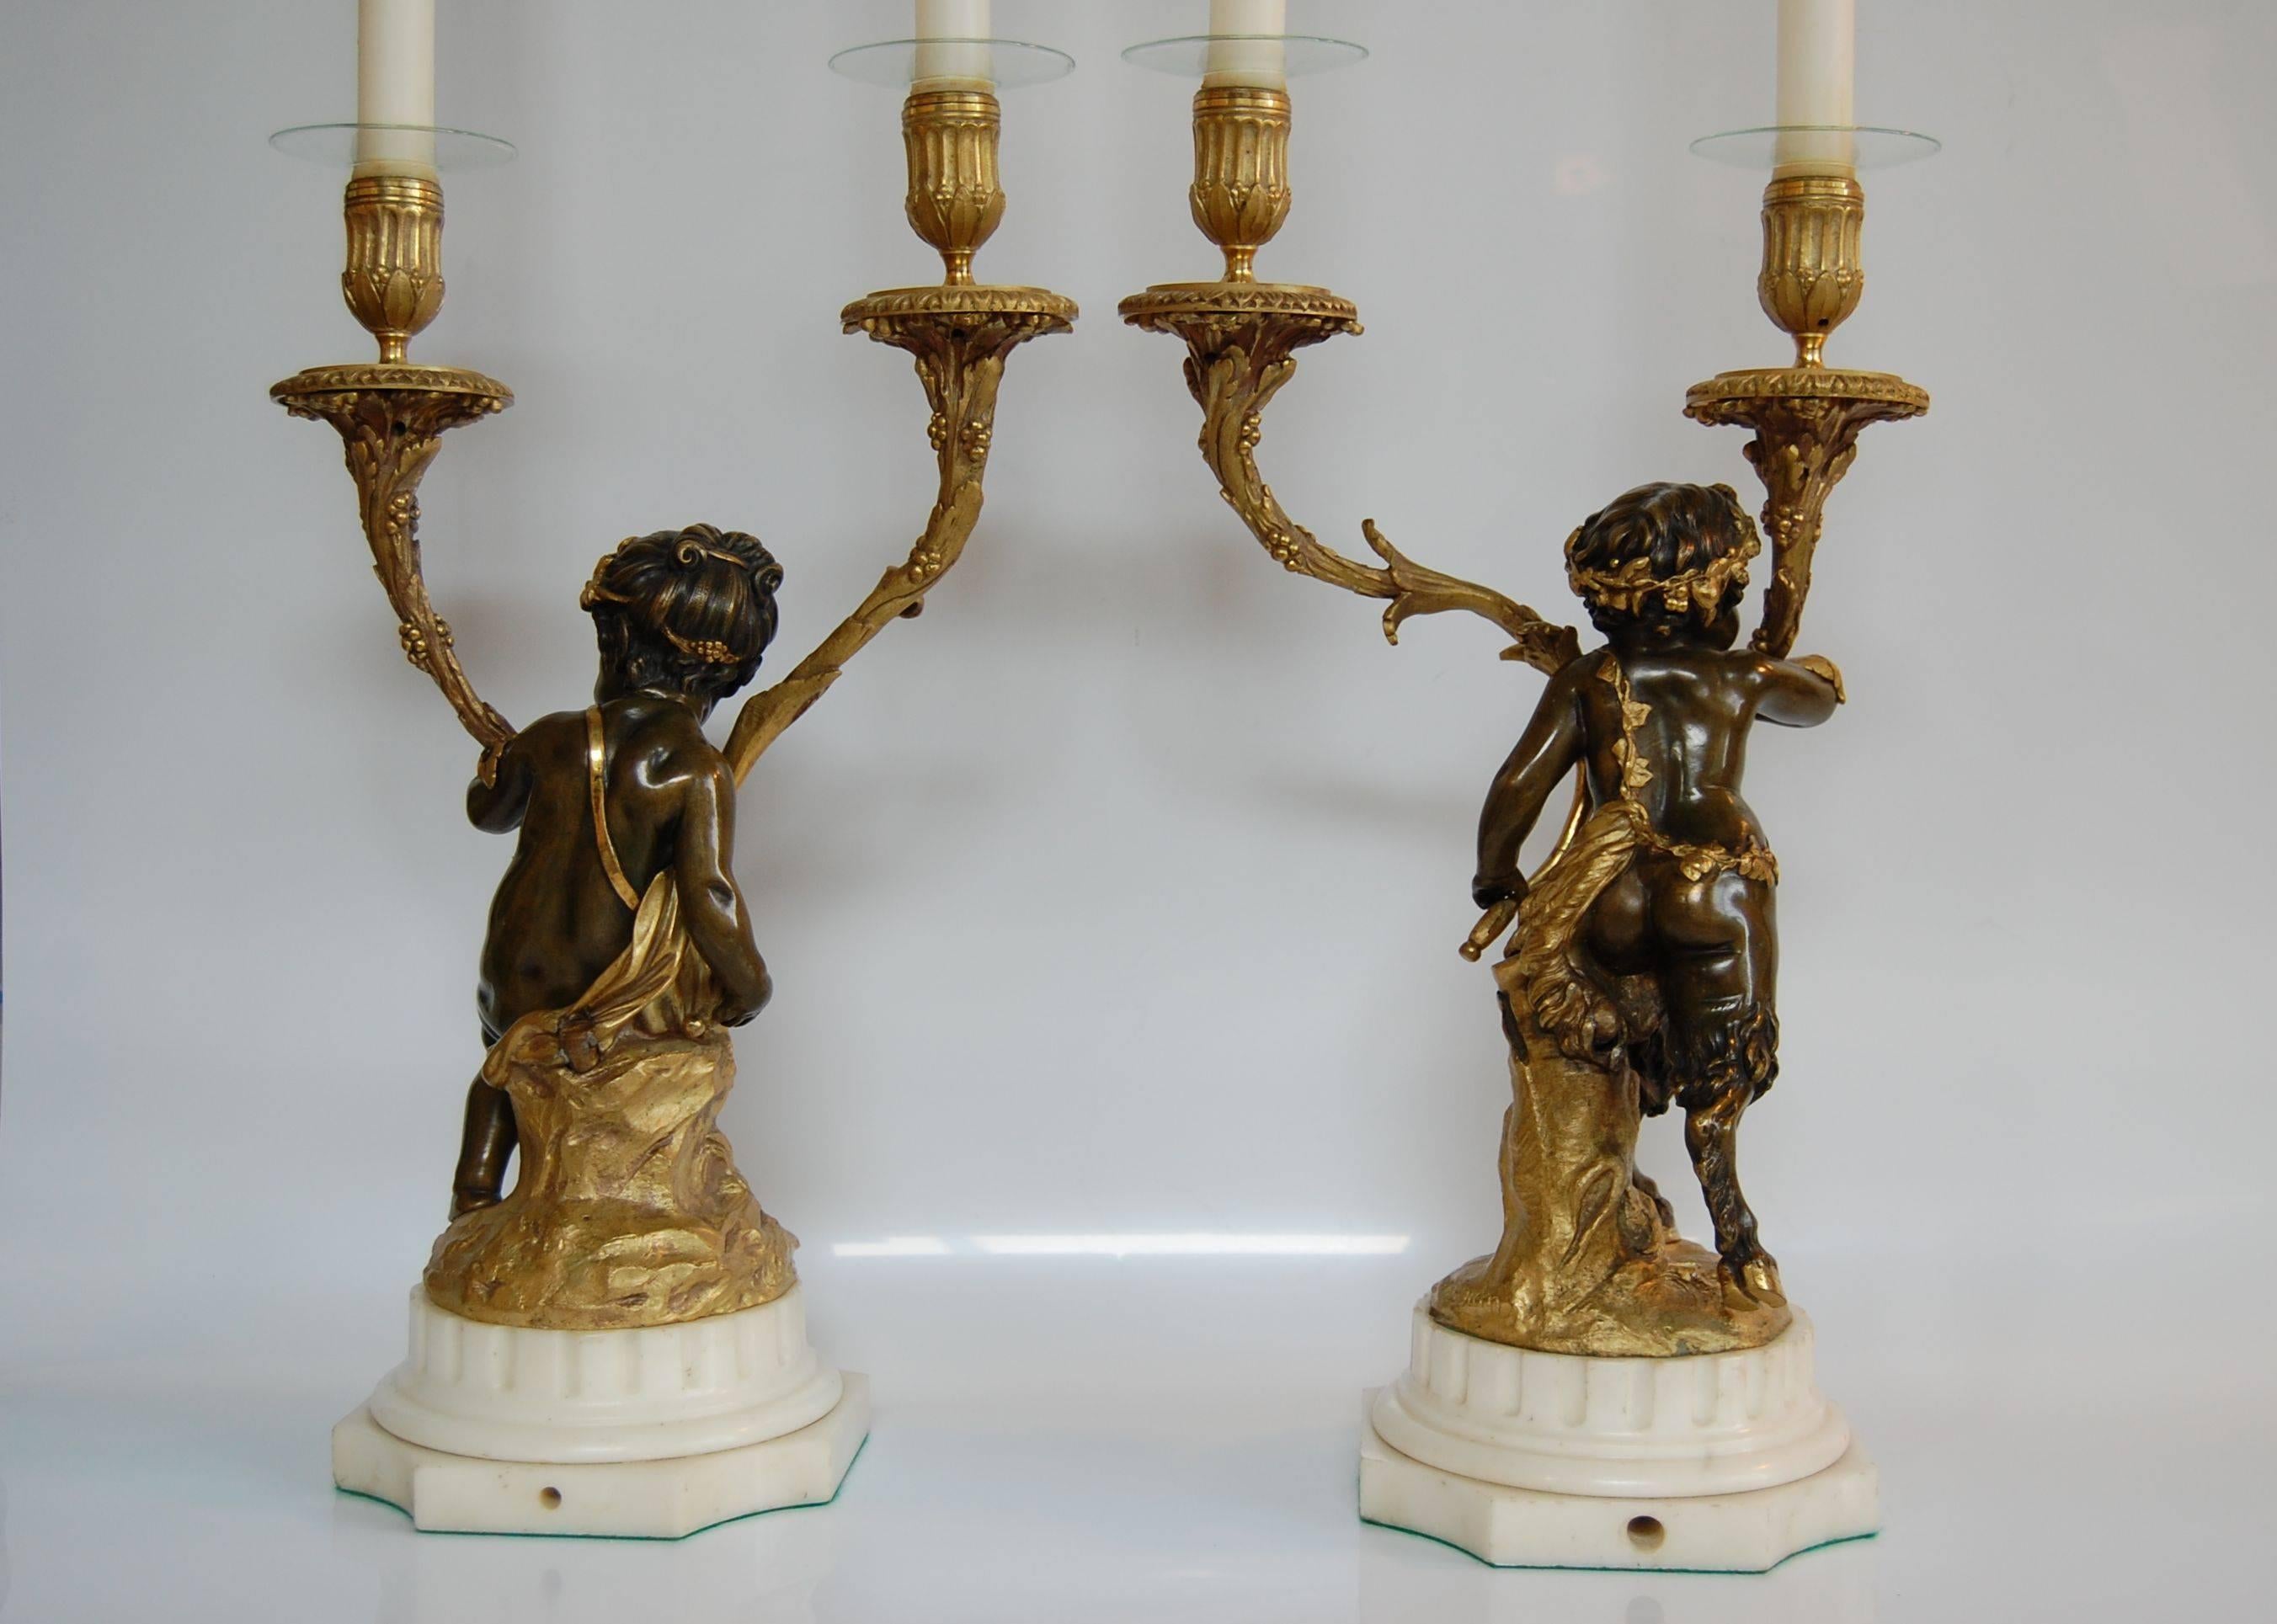 Pair of Gilt and Patinated Two-Light Candelabra, Signed 